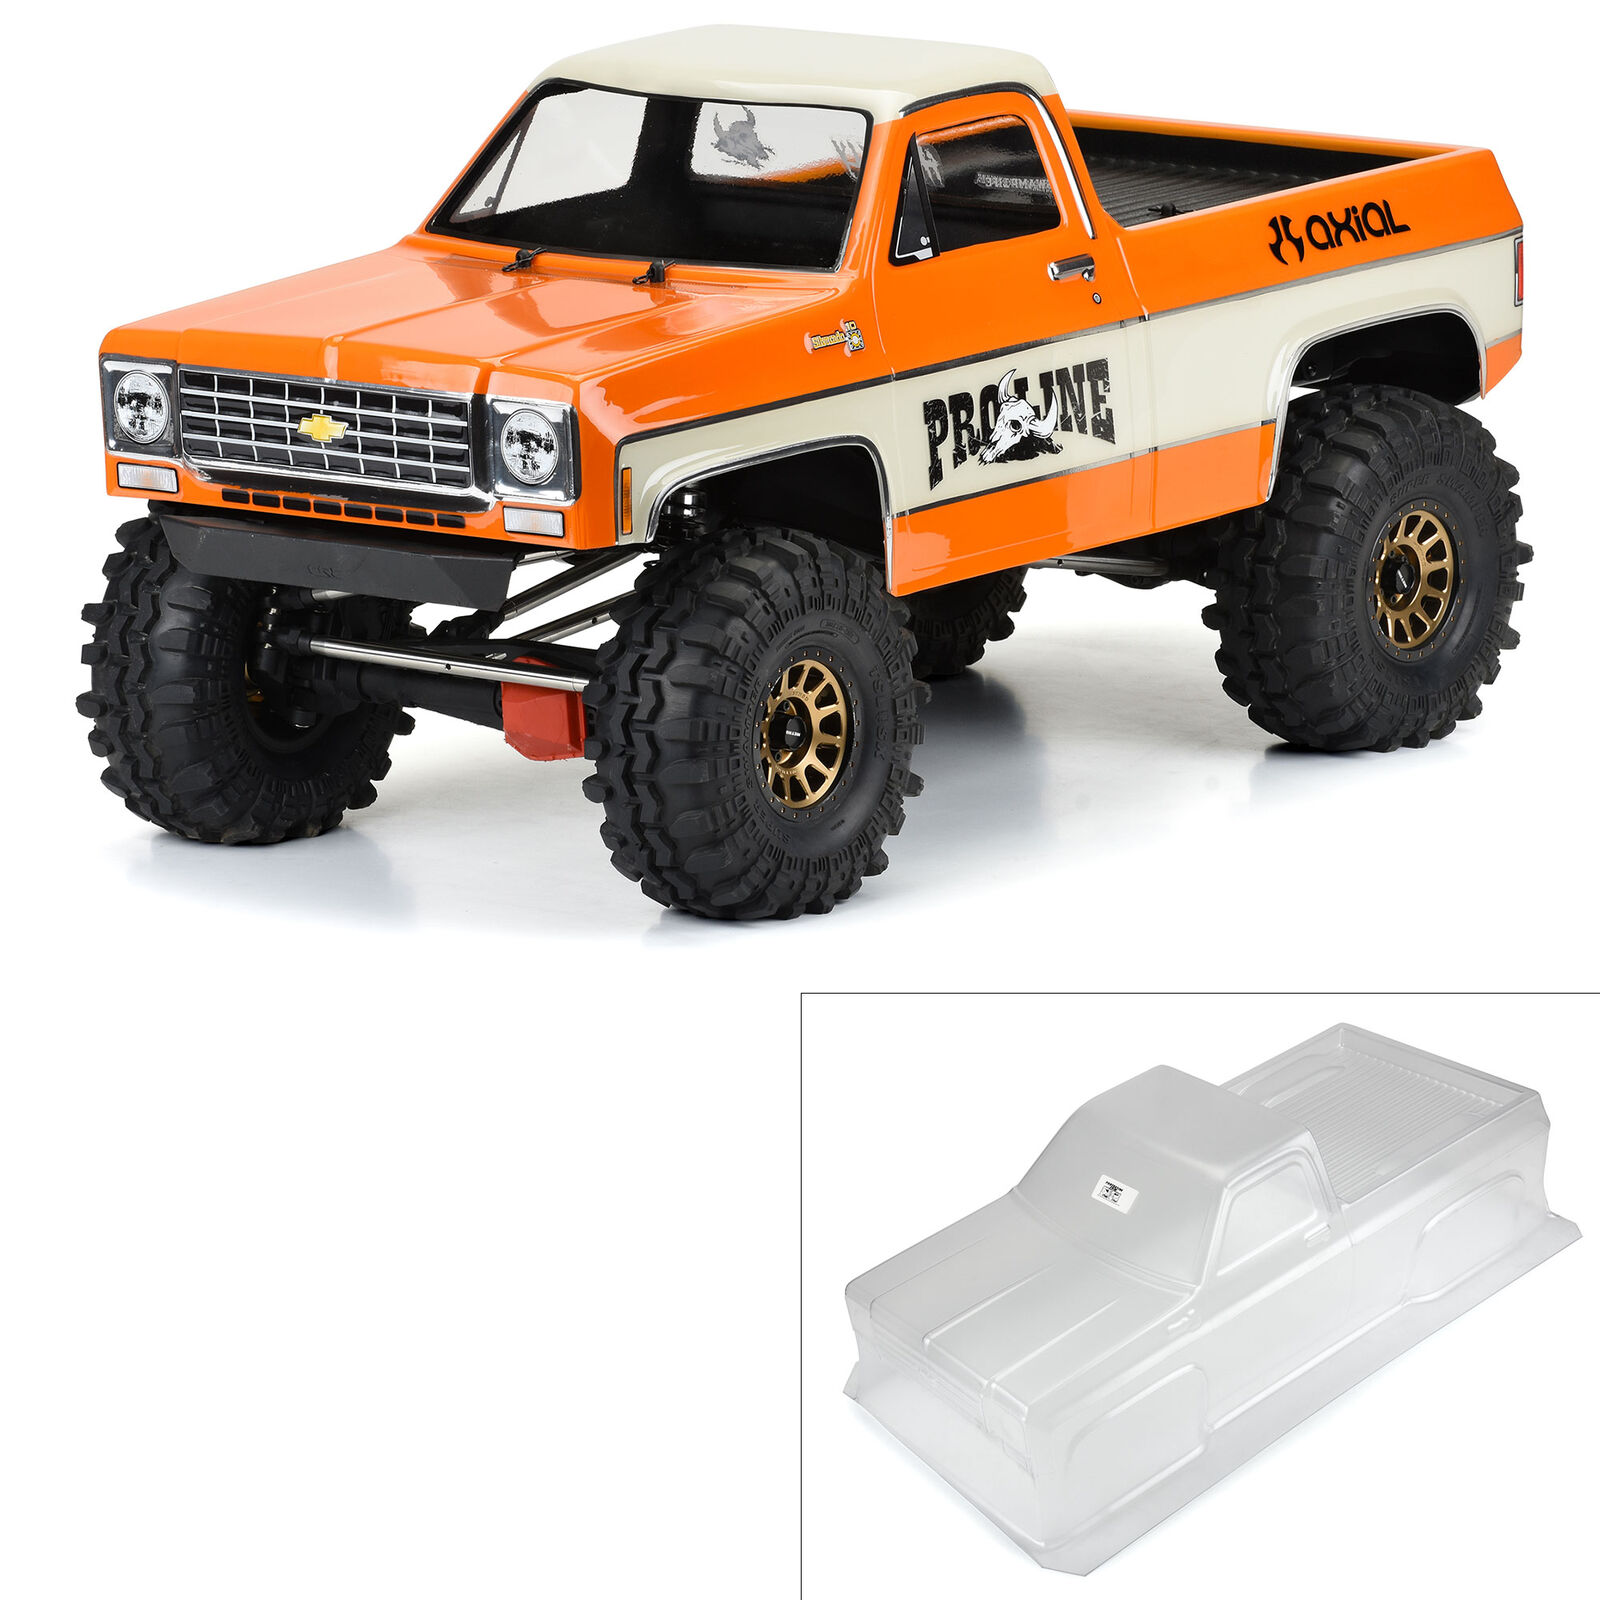 Proline 1/6 1978 Chevy K-10 Clear Body for Axial SCX6